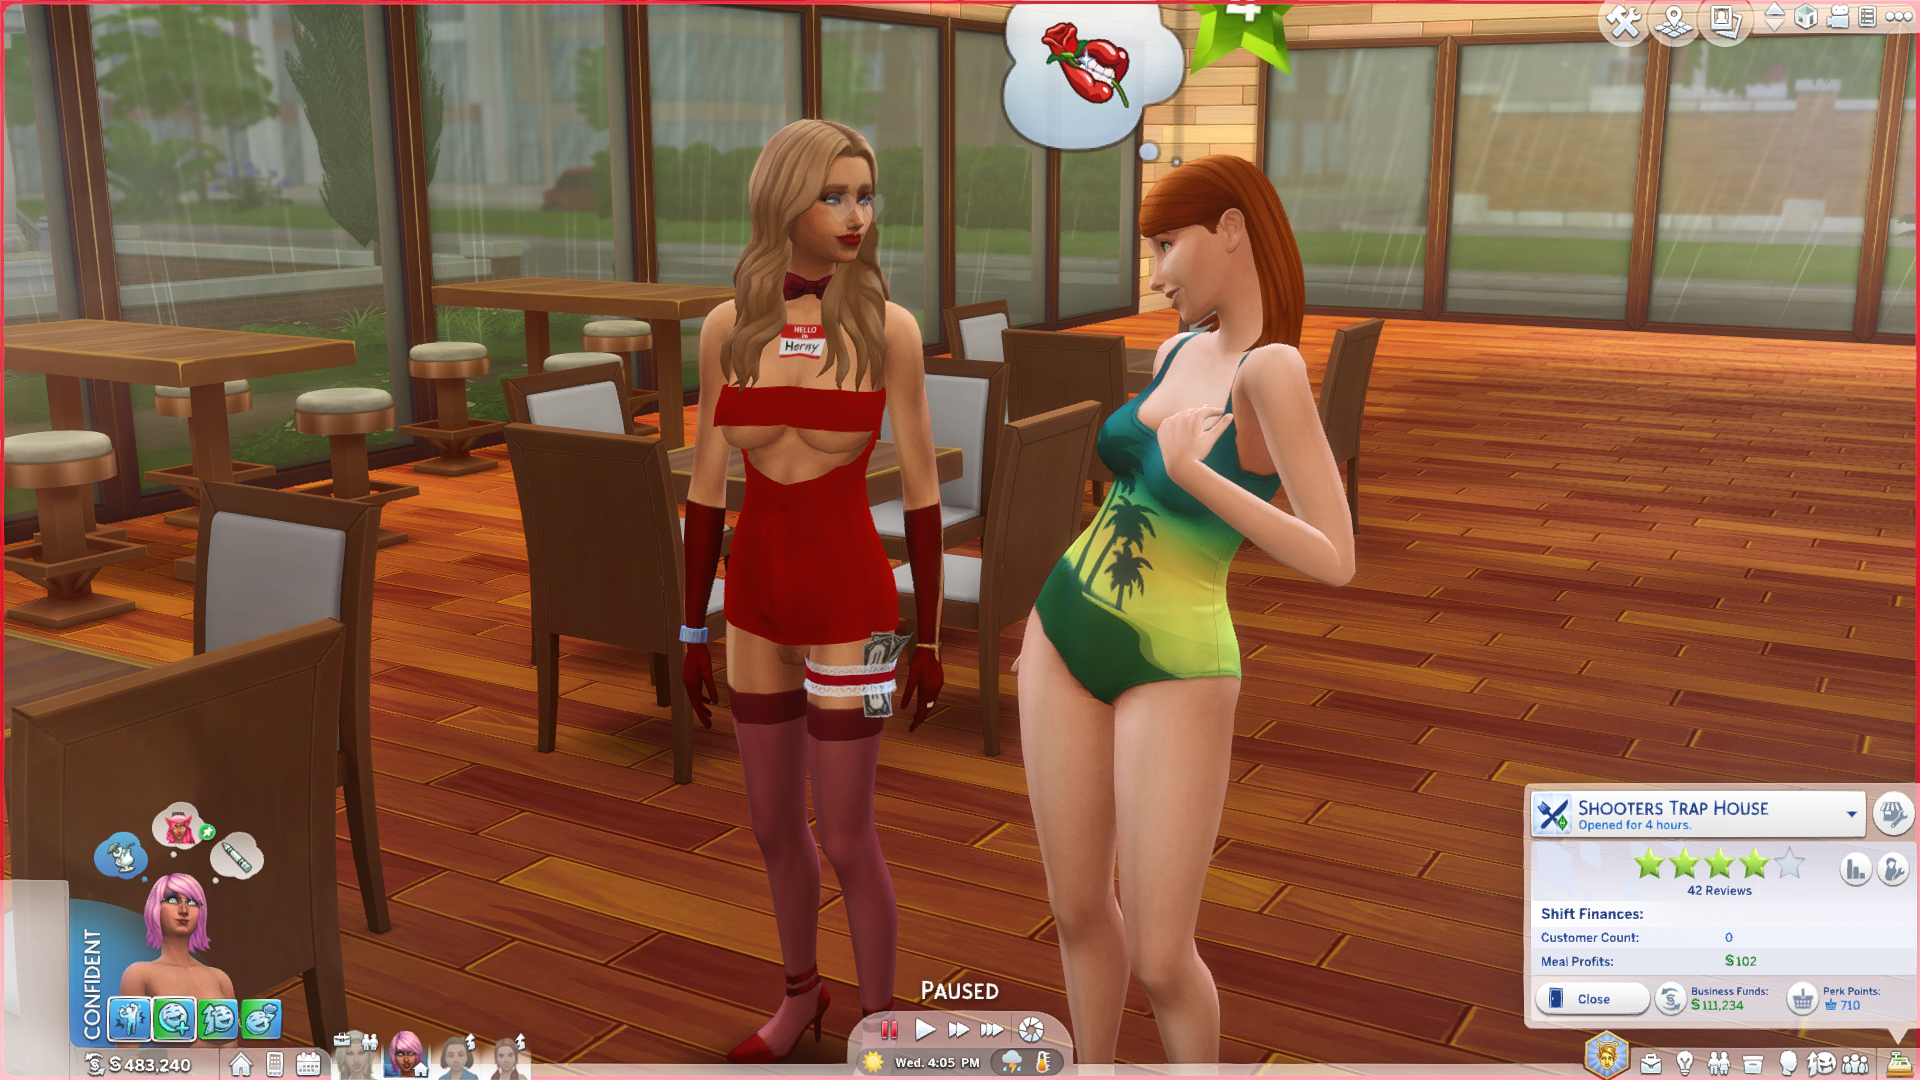 The Weird Sims Thread Show Us The Weird Side Of Your Game